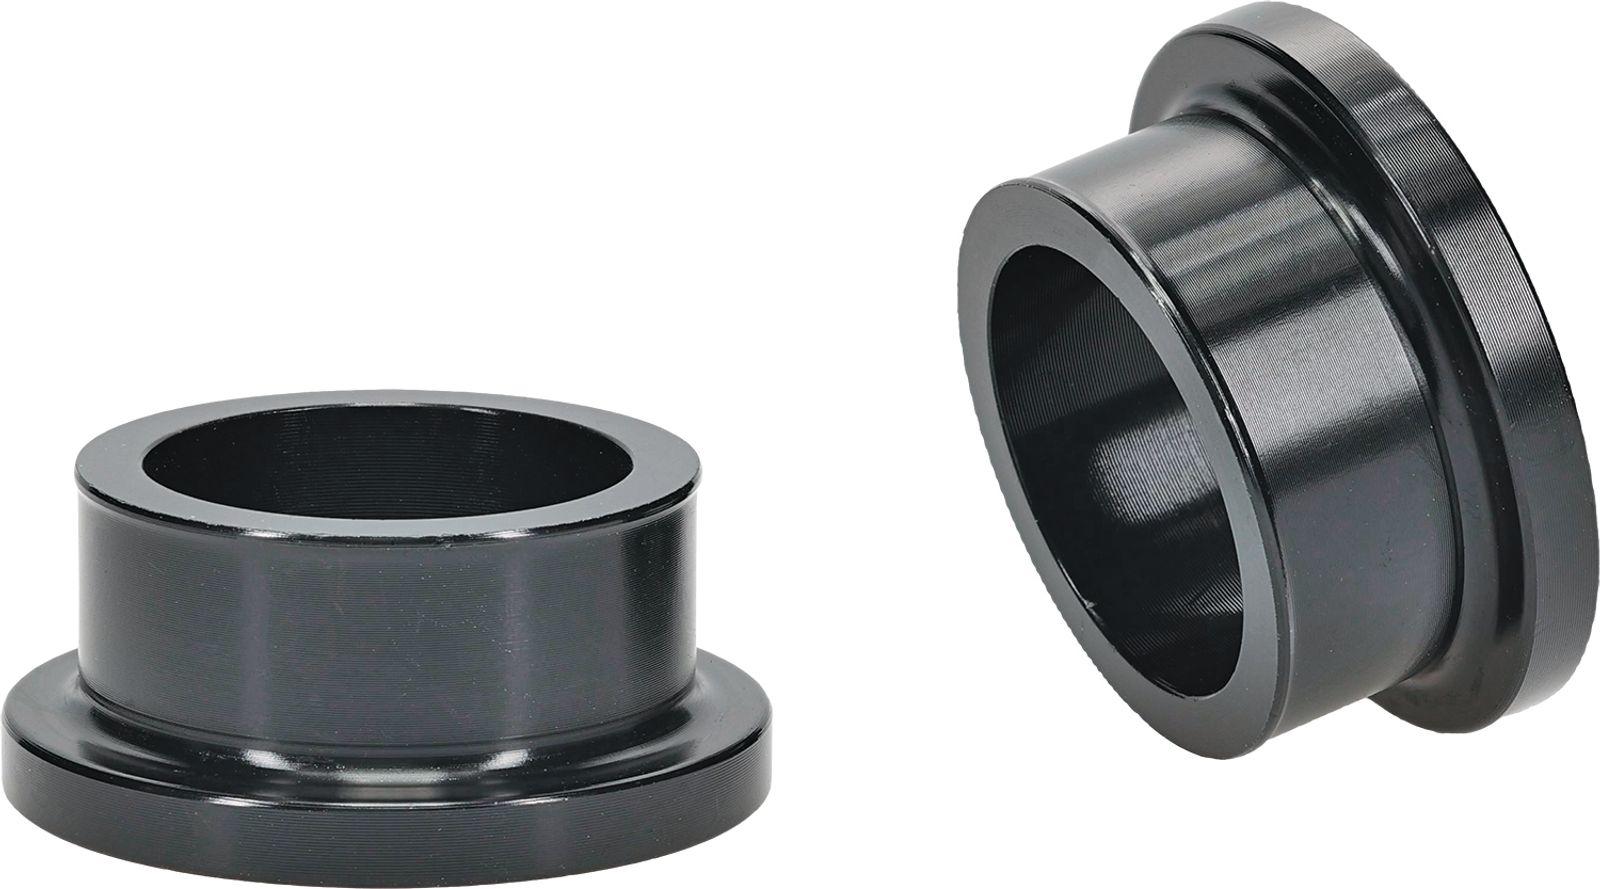 Wrp Rear Wheel Spacer Kits - WRP111102-1 image